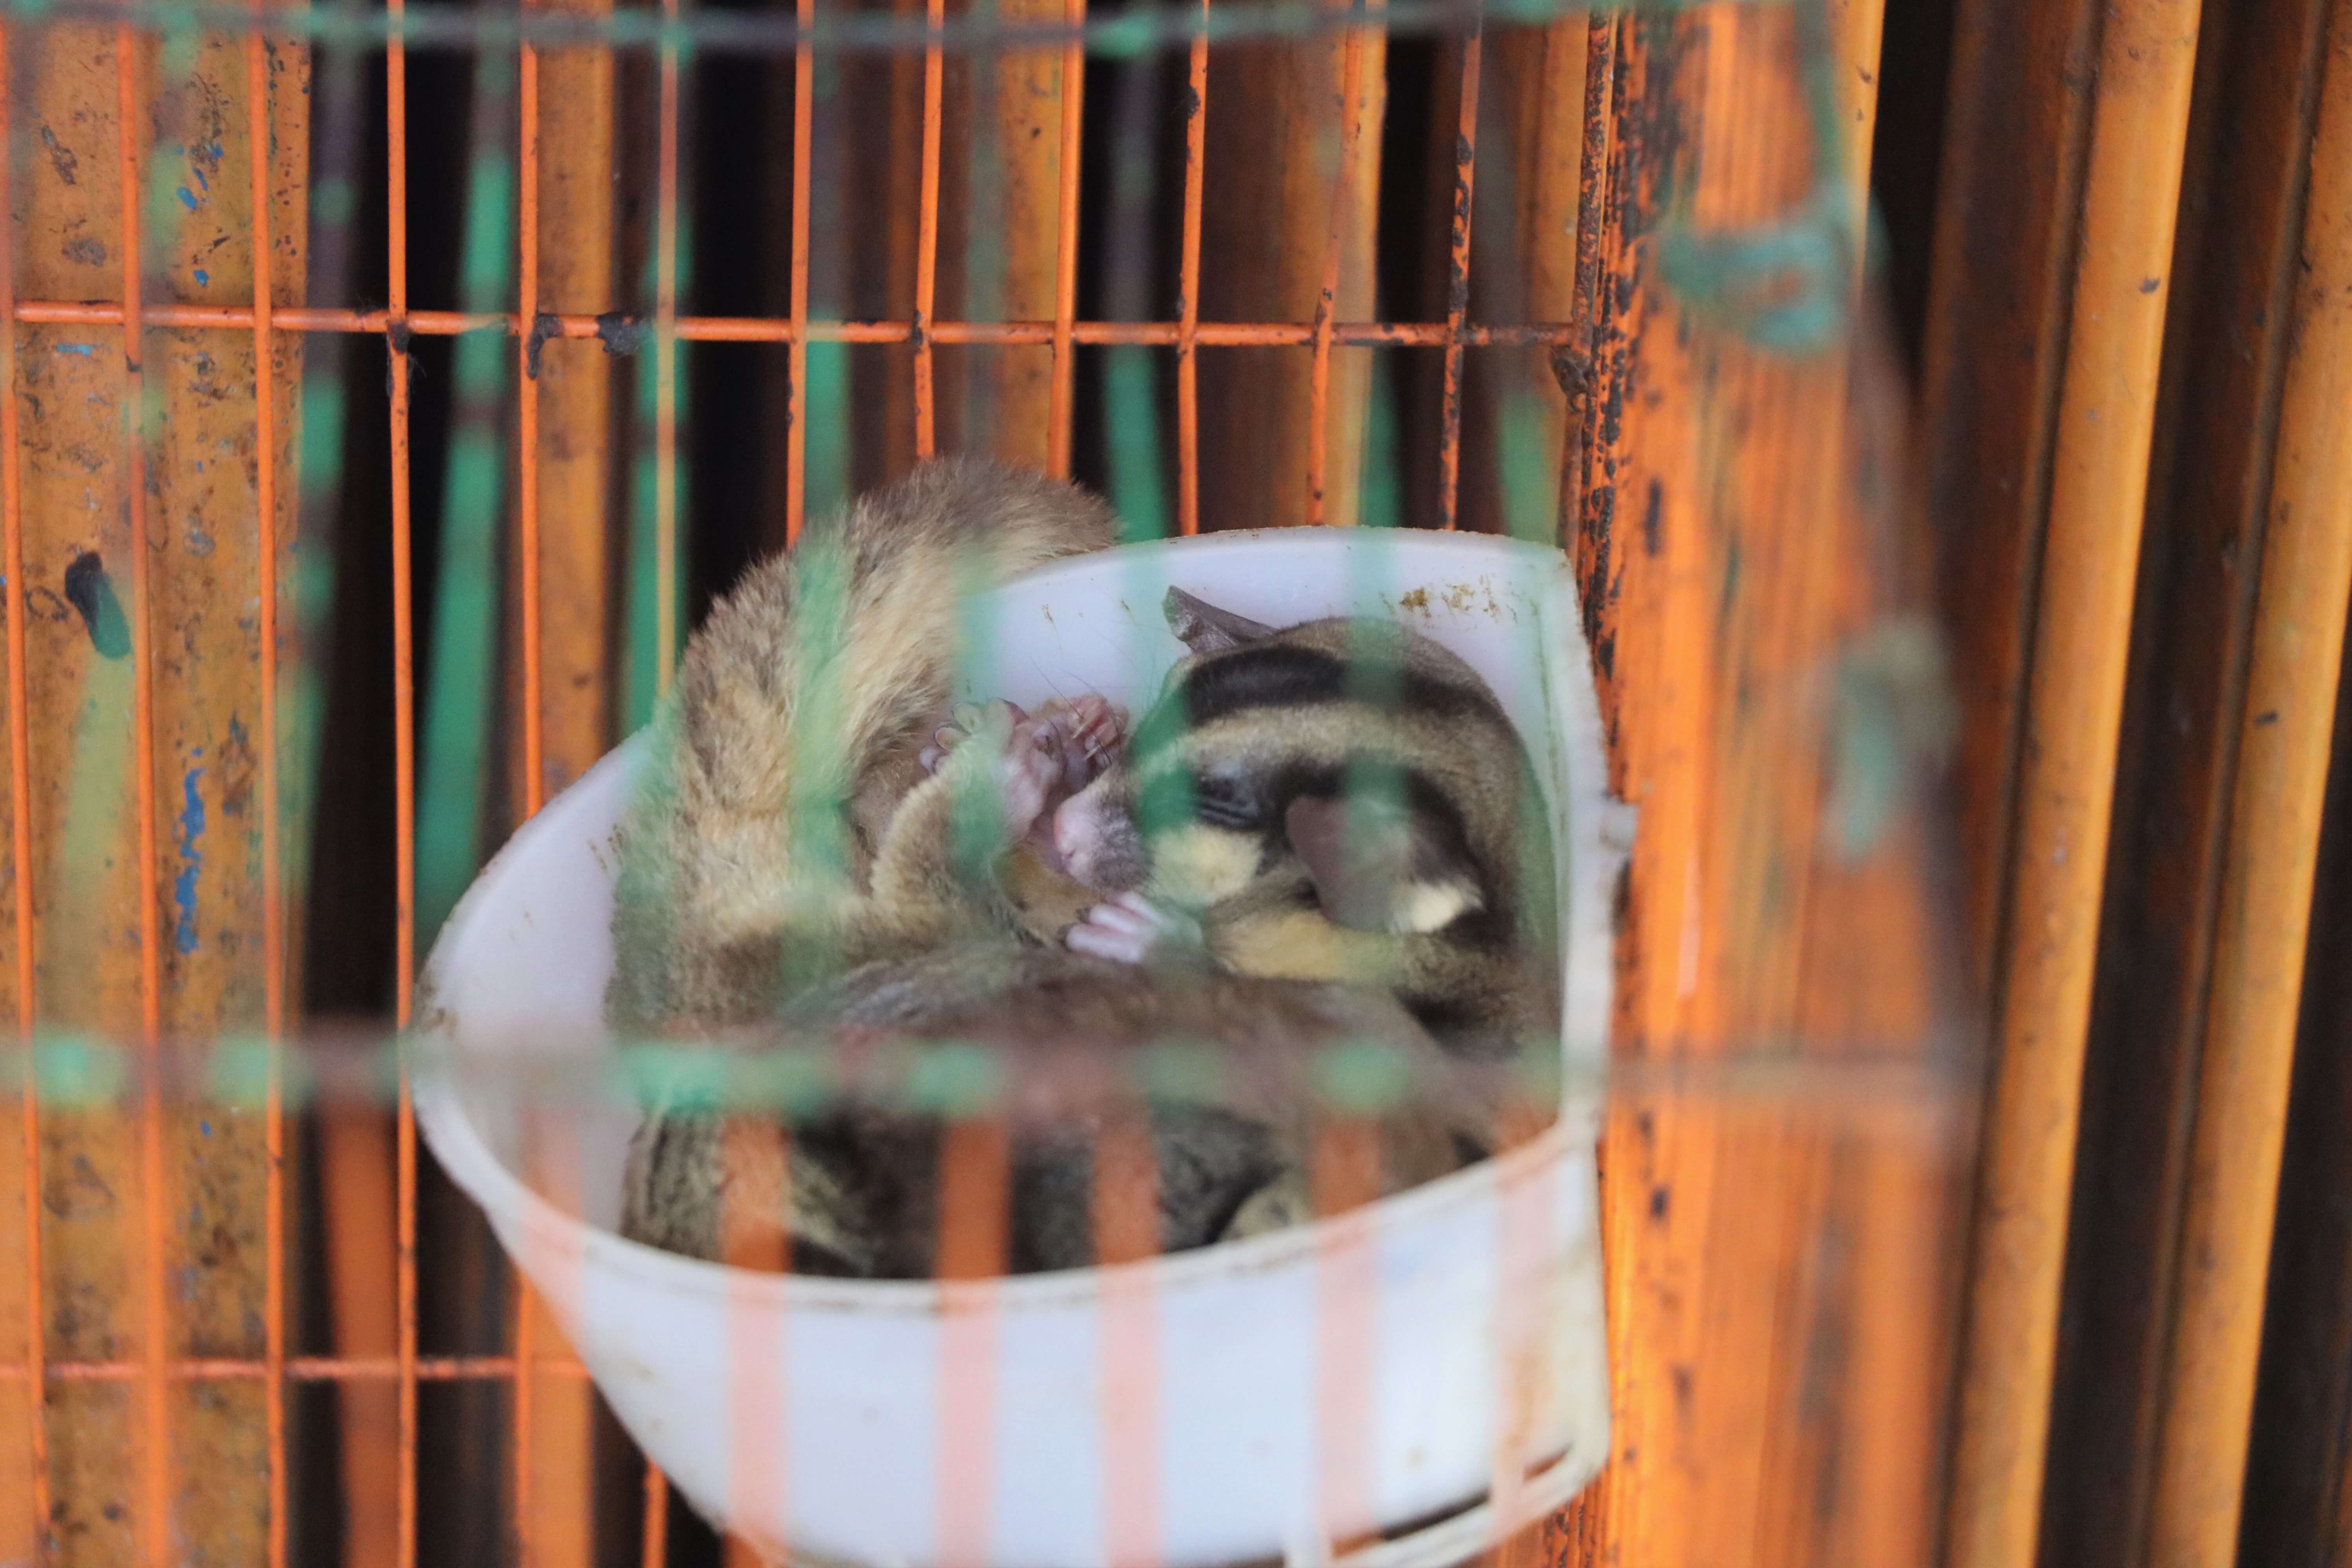 Social Media: The Problem or the Solution to Indonesia’s Animal Trafficking Epidemic?